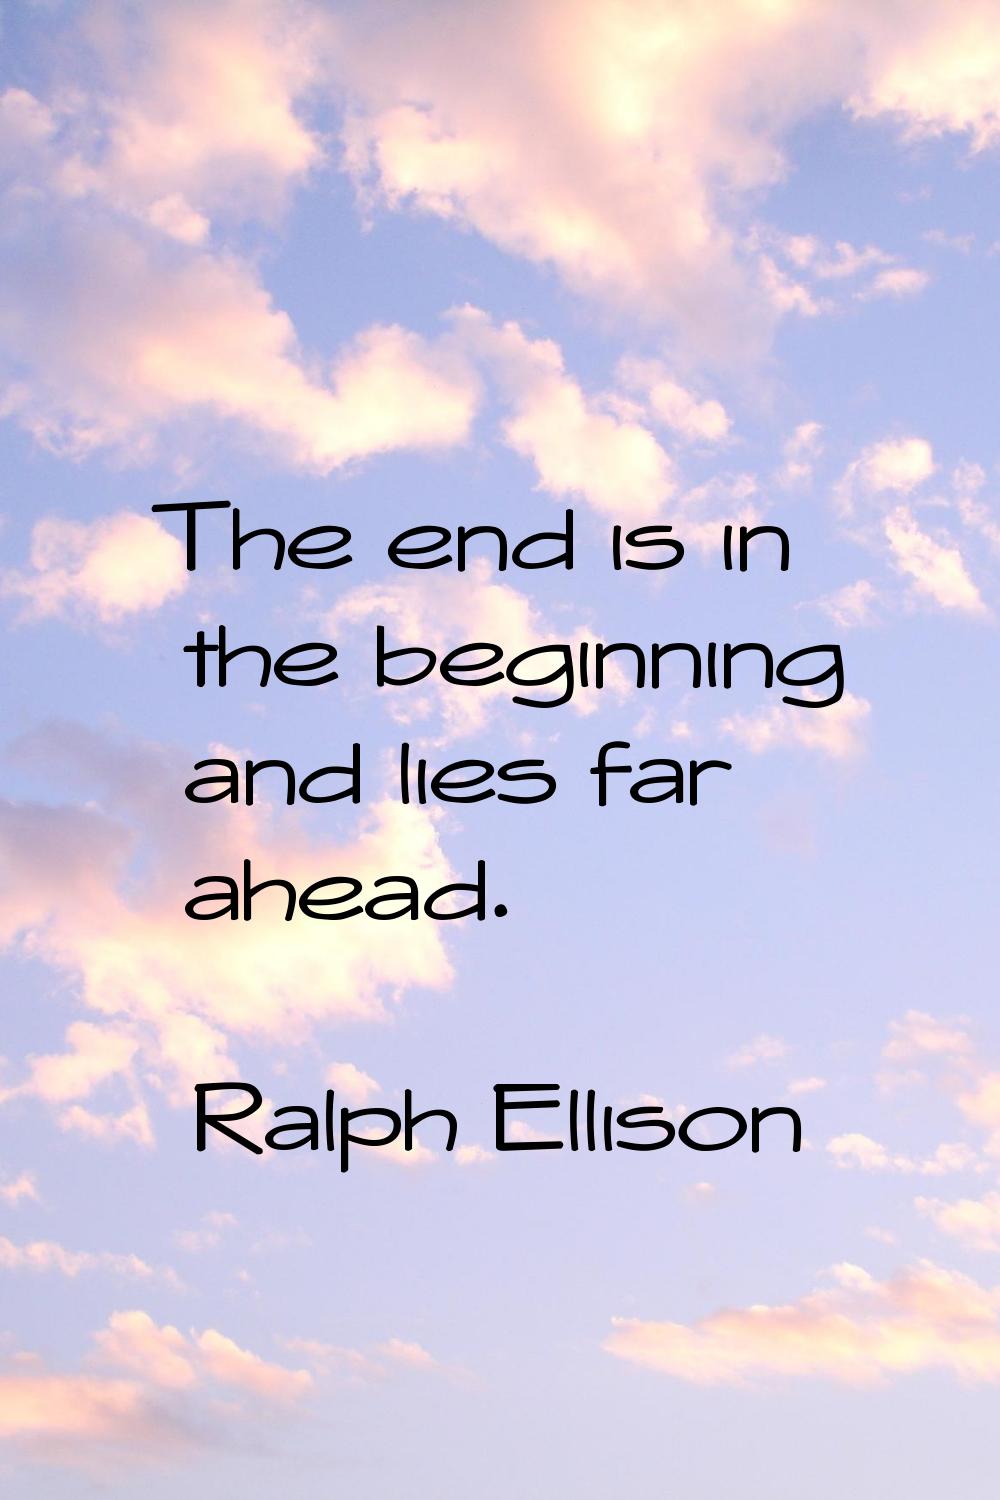 The end is in the beginning and lies far ahead.